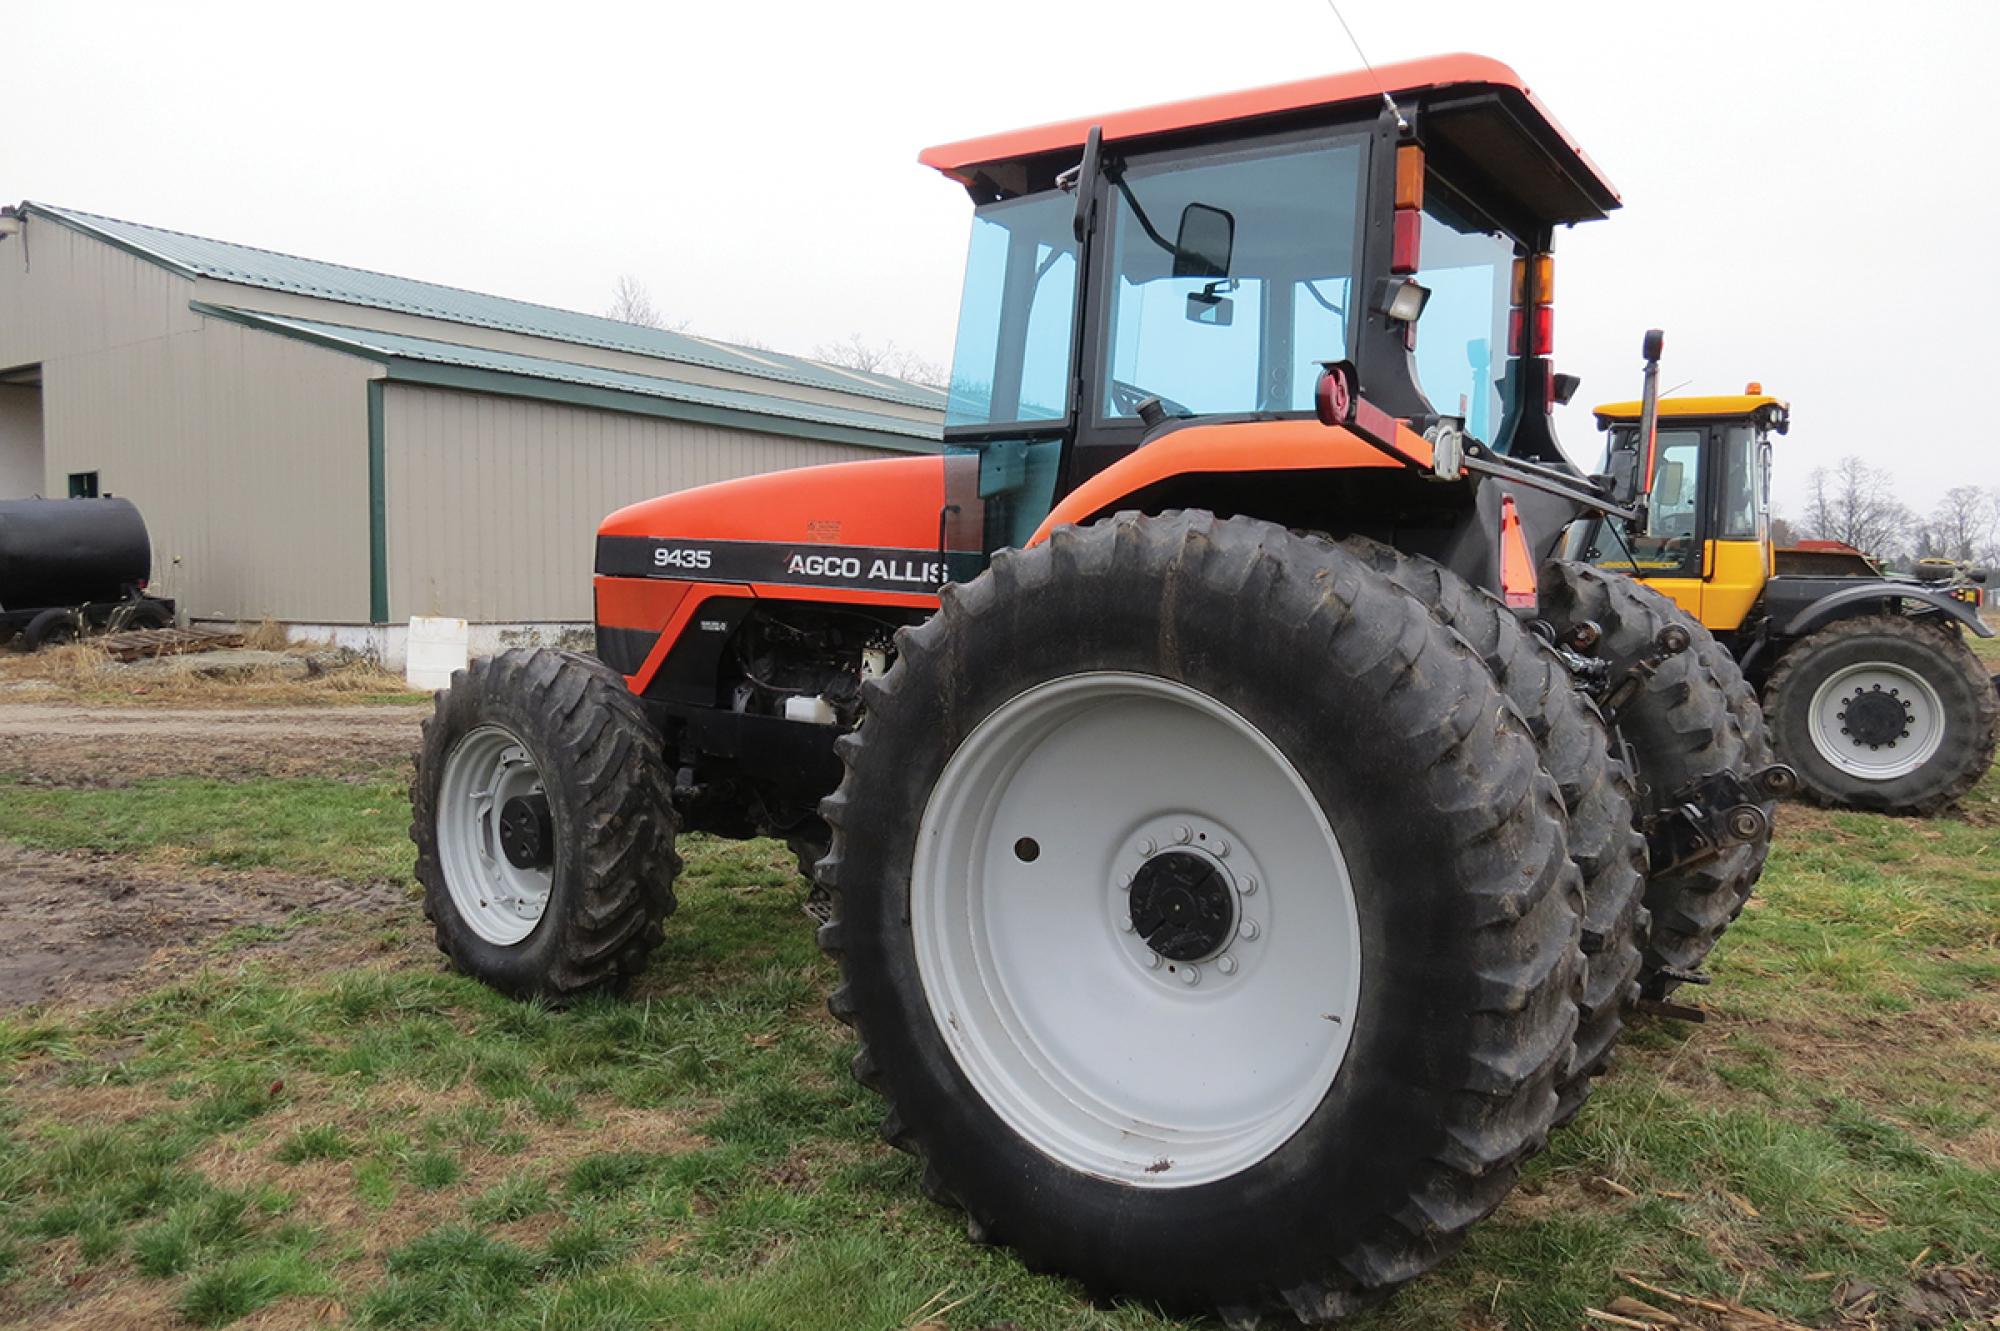 Agco Allis 9435 tractor, MFWD, 18.4-42 tires & duals, 14.9 R 30 front ...